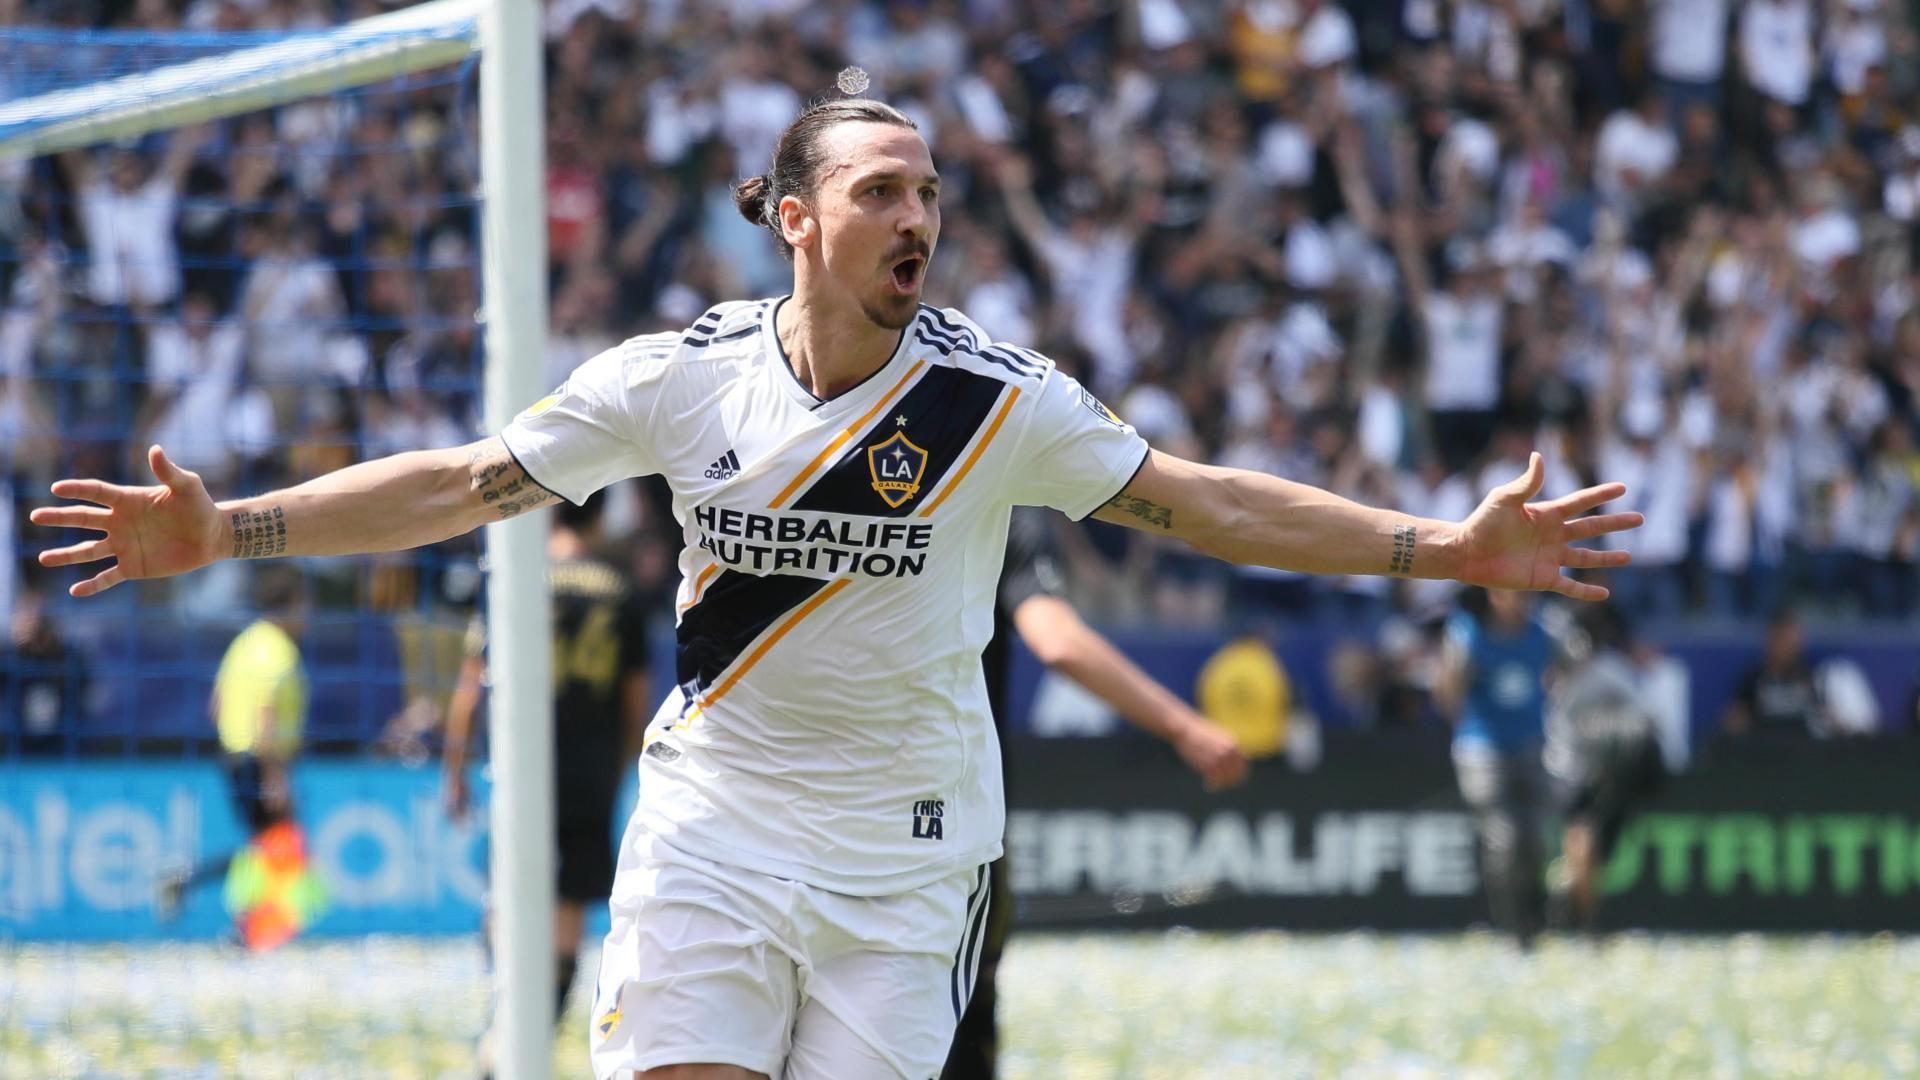 Zlatan Ibrahimovic says LA Galaxy will win in 2019 discusses first